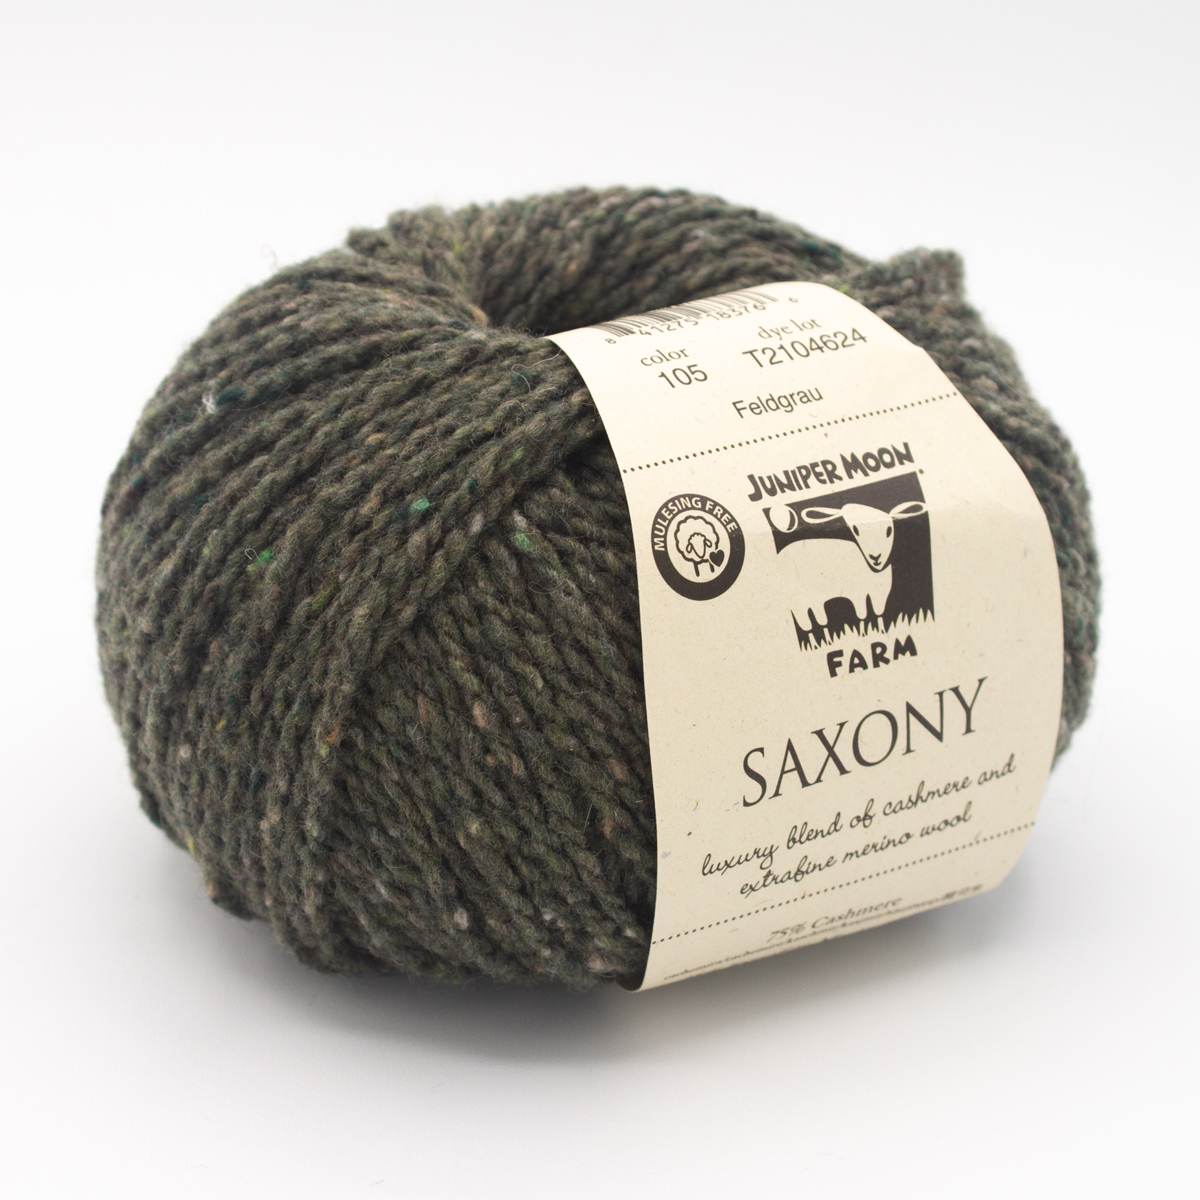 a skein of Saxony